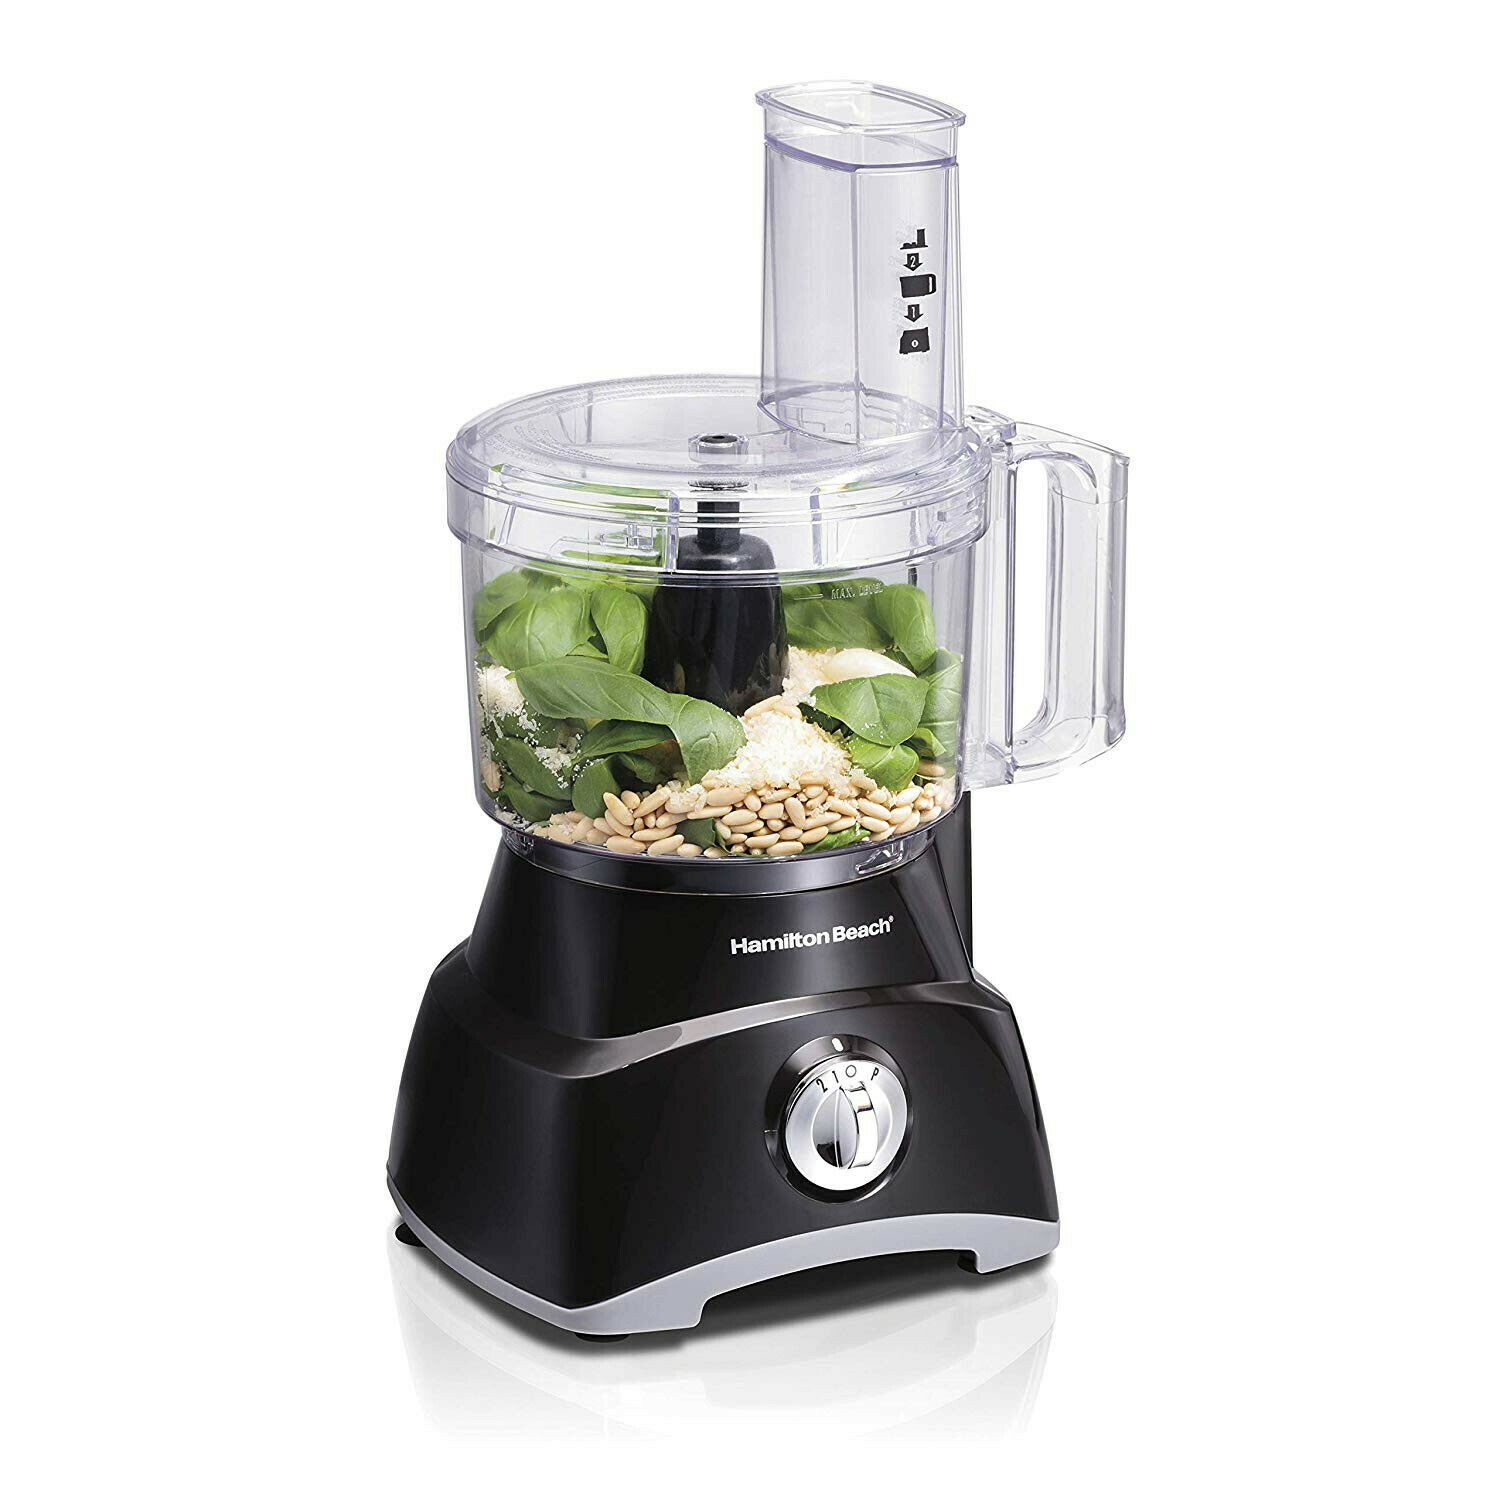 Hamilton Beach Food Processor, Slicer And Vegetable Chopper With Compact Storage